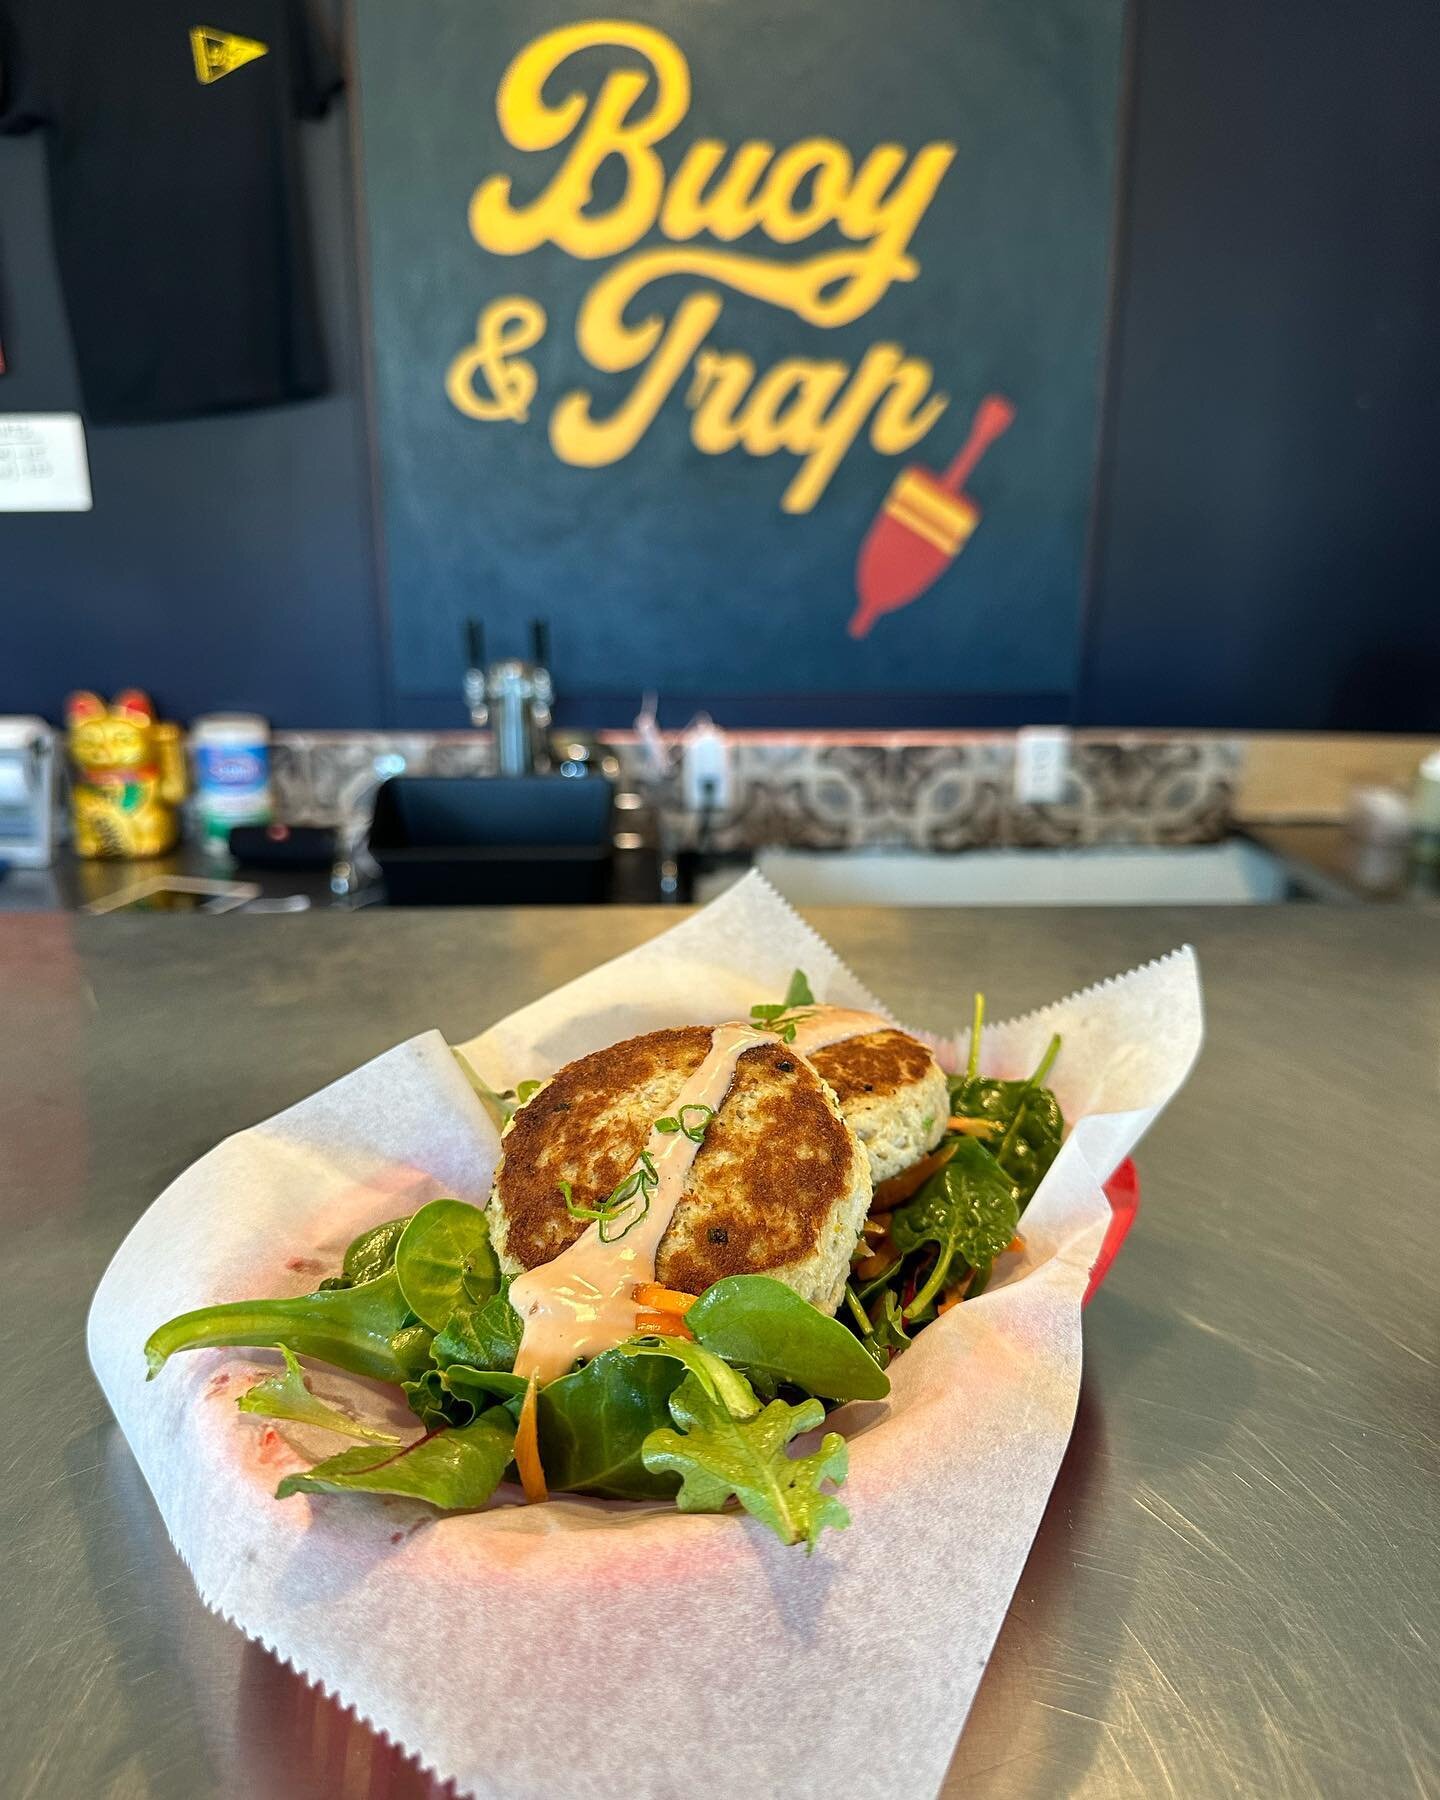 Crab cakes are here! We are offering these morsels as a lunch special over a salad or to take home and sizzle up on your own time! 🦀🦀🦀🦀🦀

#truckee #tahoe #truckeefood #tahoefood #crabcakes #seafood #fishmarket